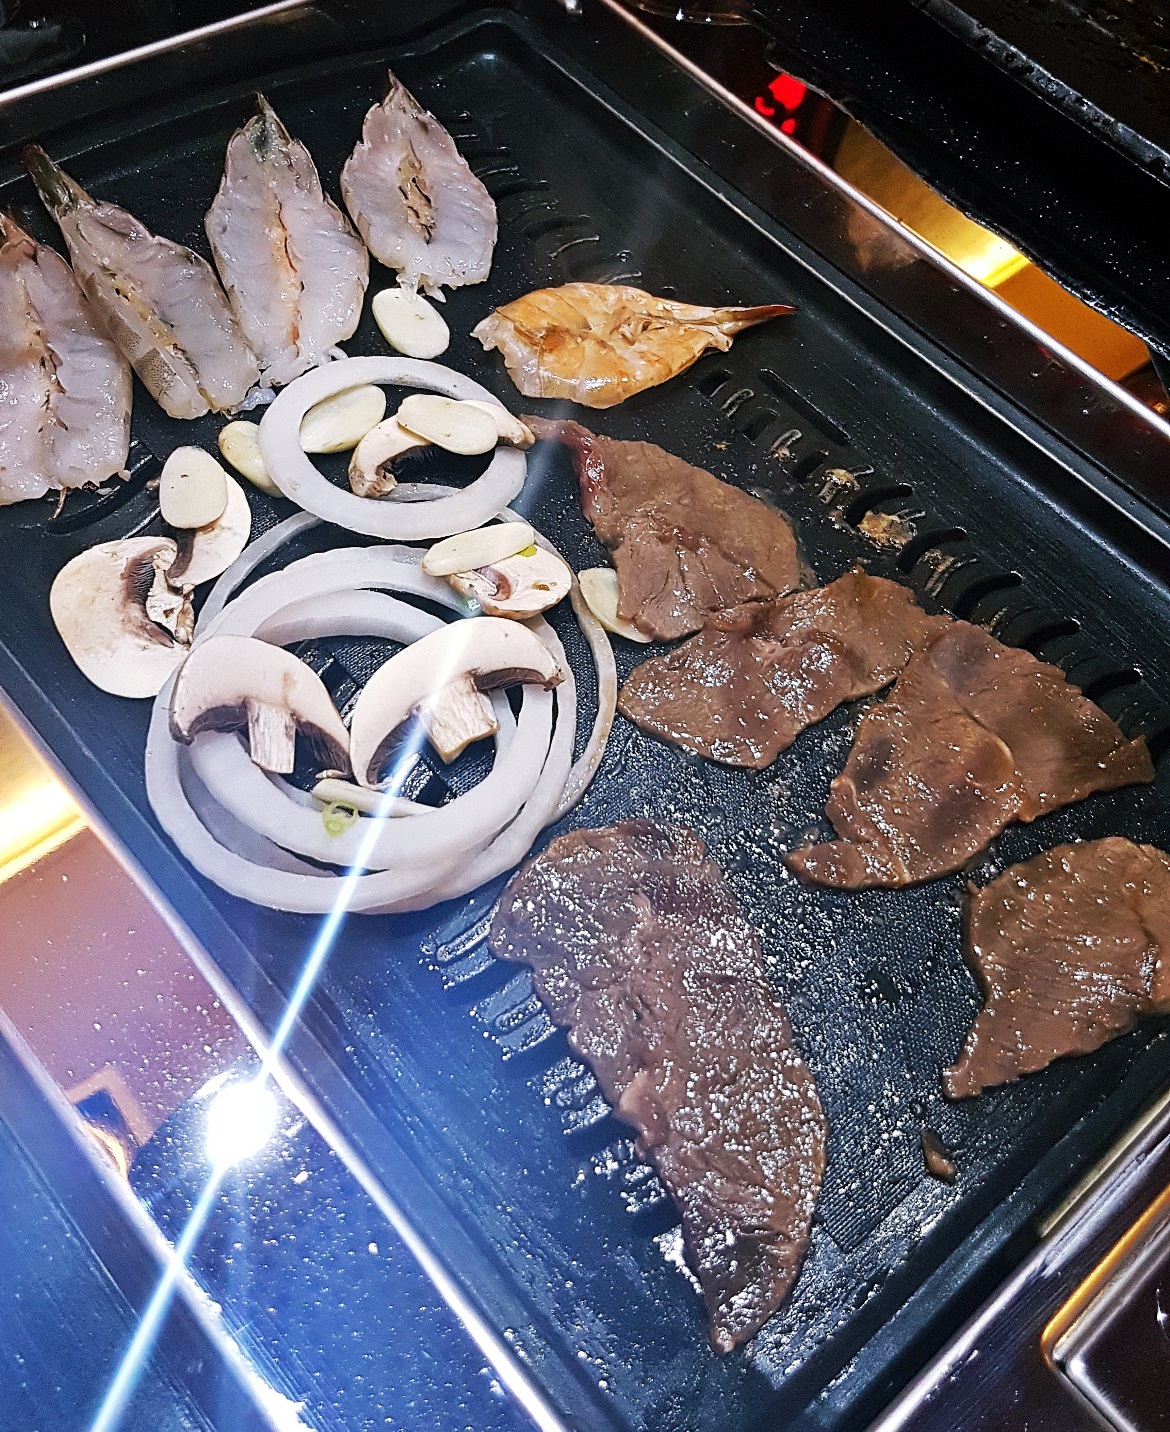 Food on the grill at Bulgogi Grill in Leeds - July 2017 Recap by BeckyBecky Blogs